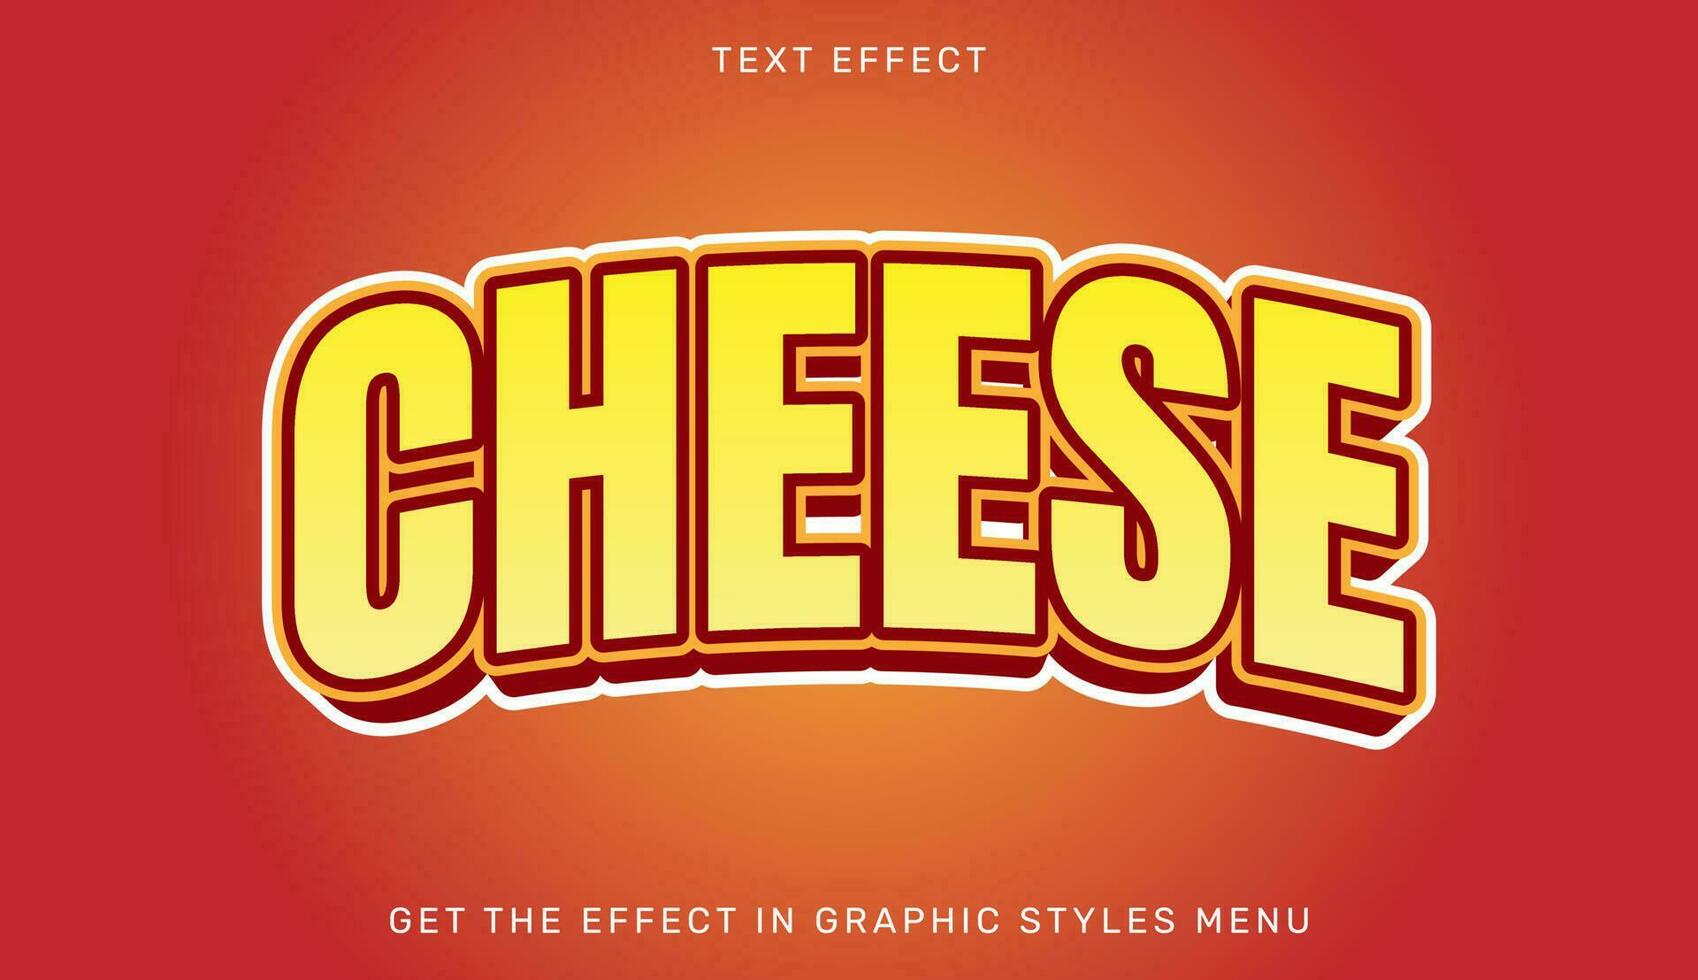 Cheese editable text effect template vector